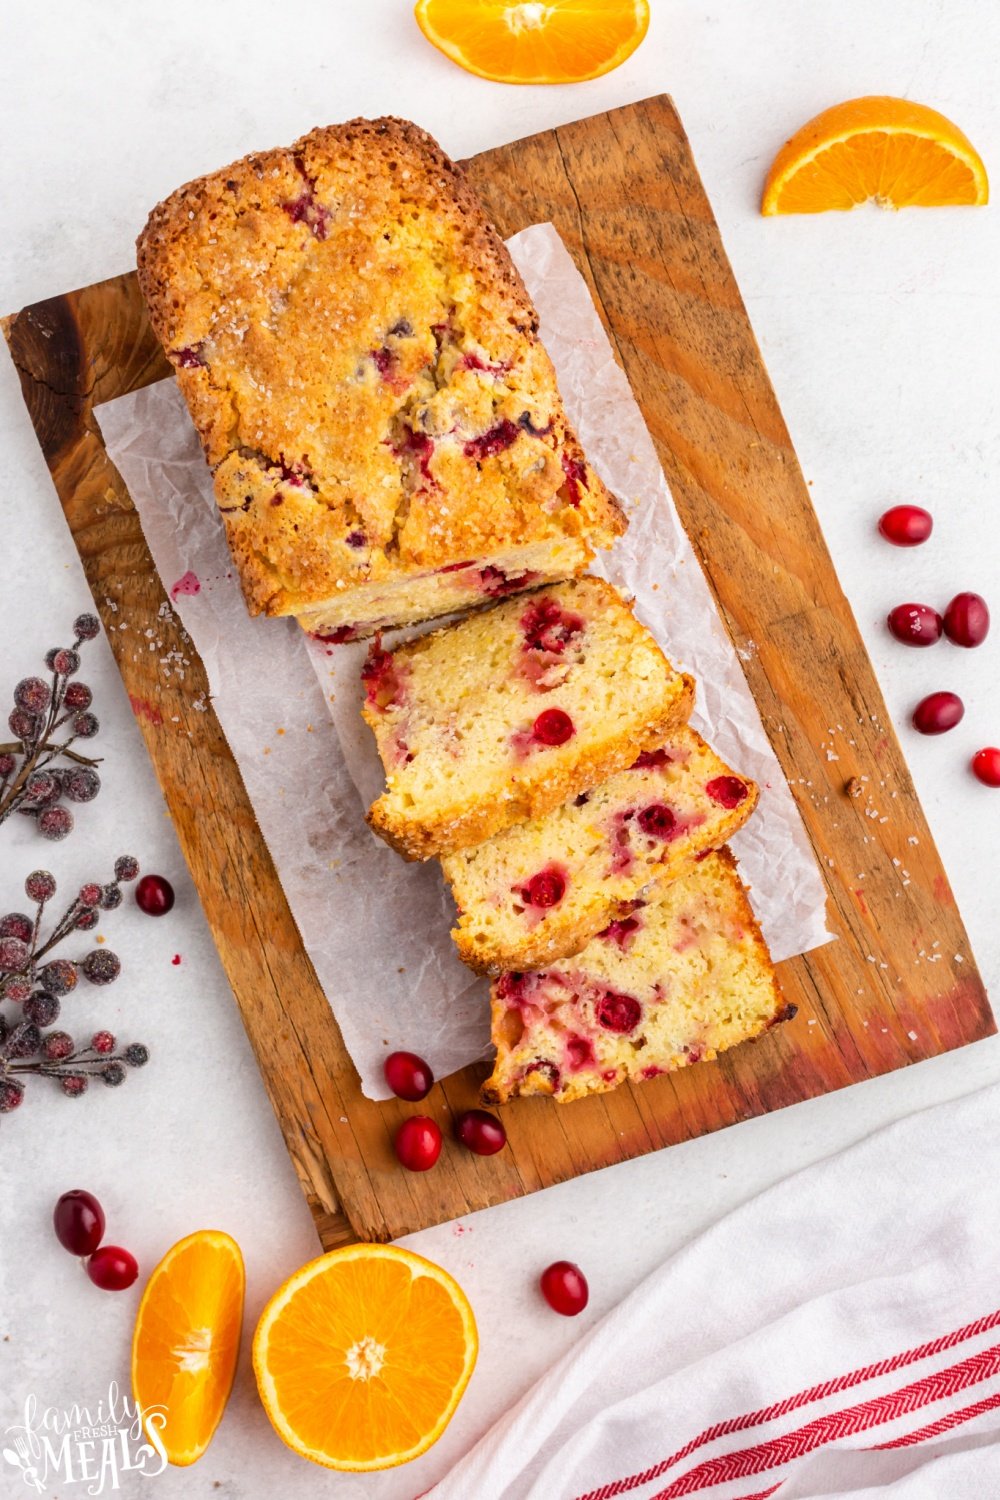 This Cranberry Orange Bread is deliciously rich, moist, and golden. It features the Christmasy flavor combo of sweet oranges and cranberries. via @familyfresh